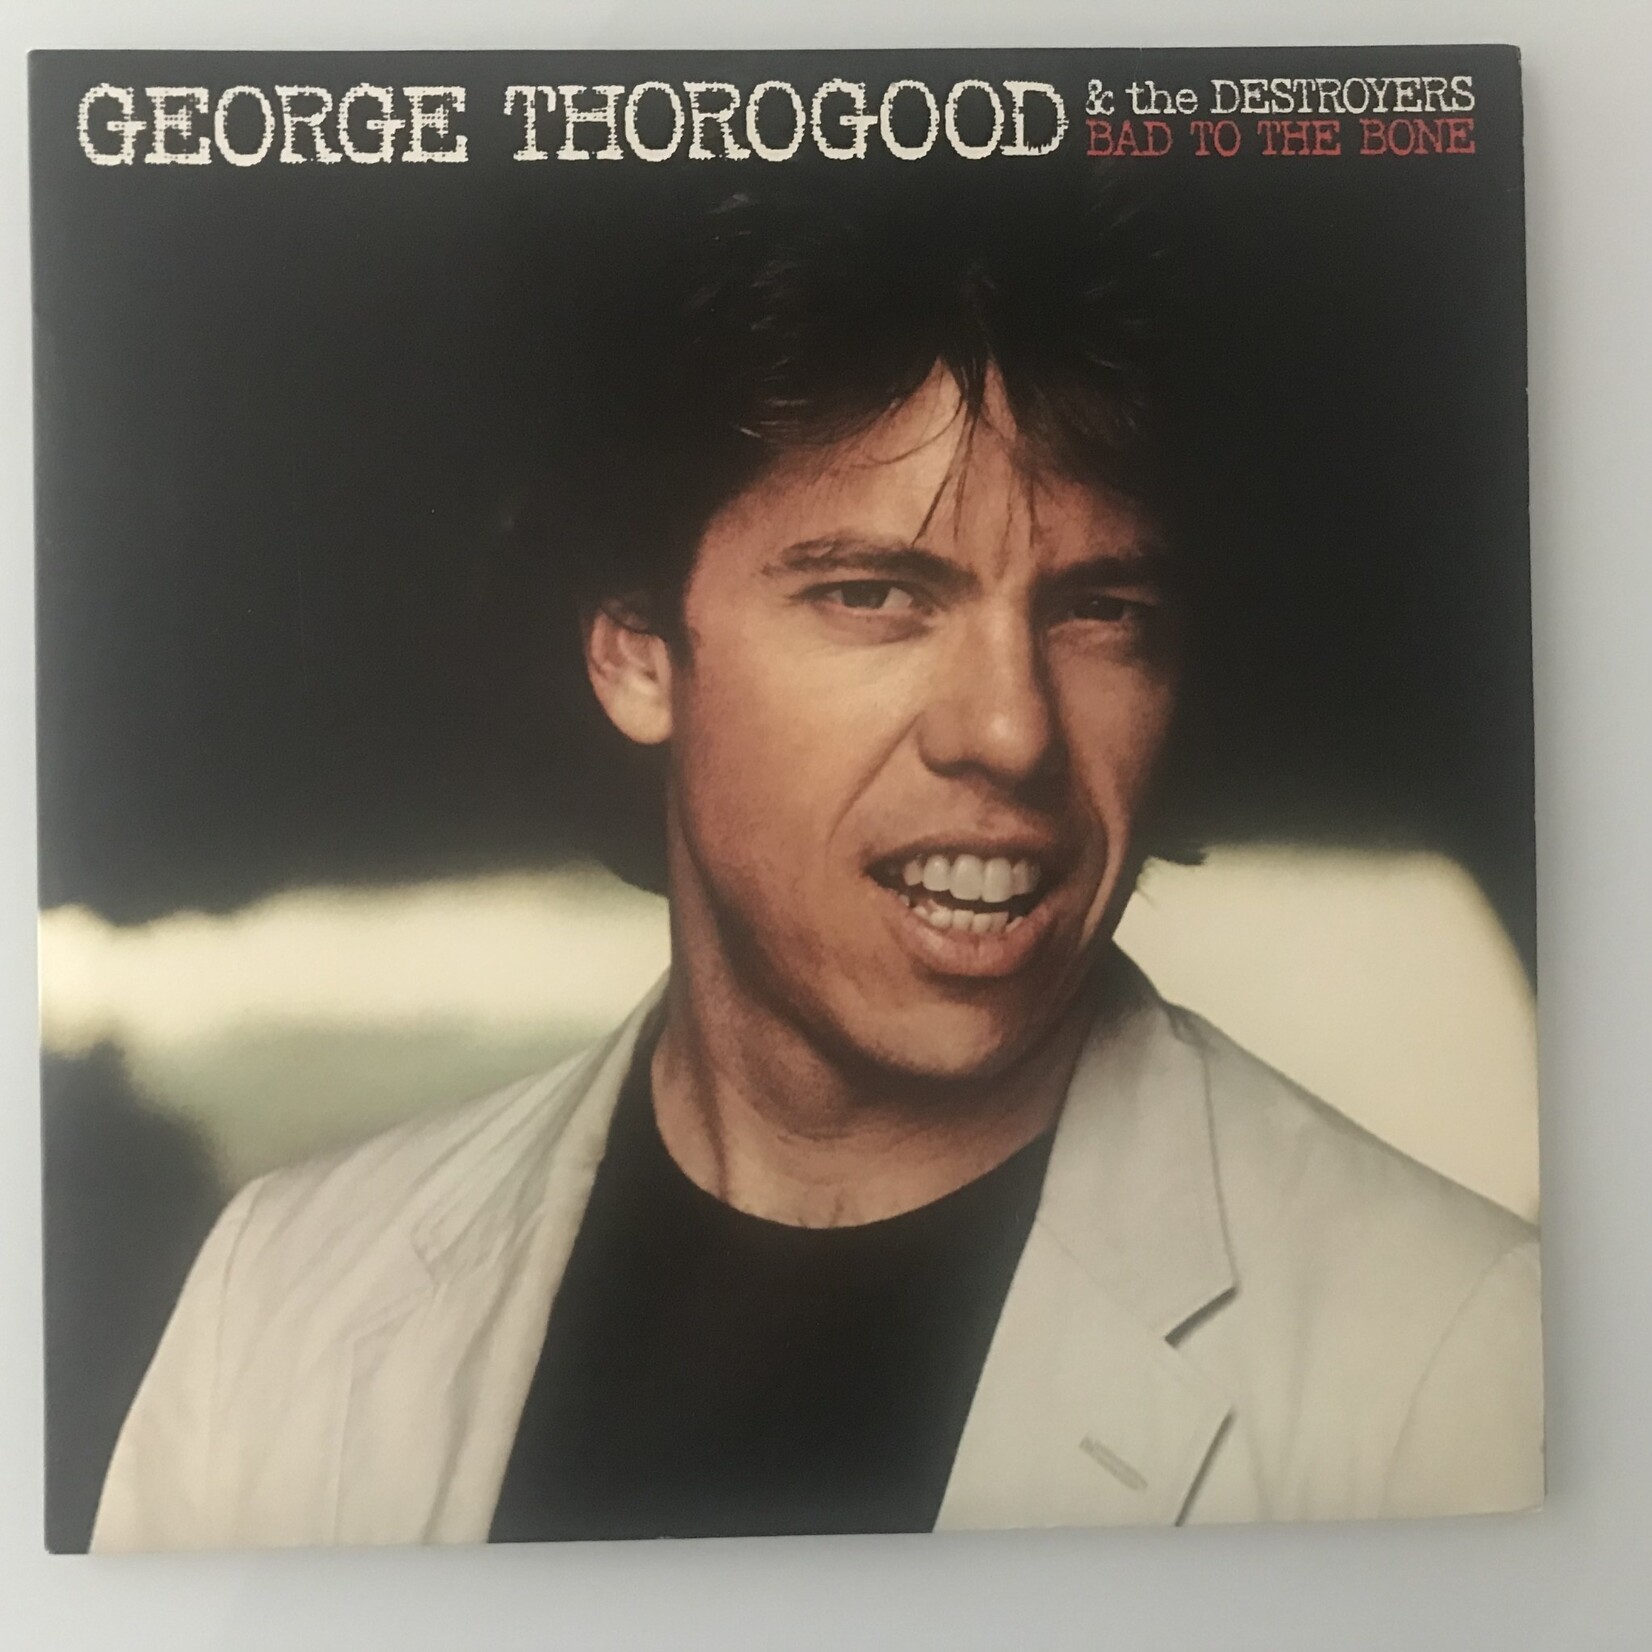 George Thorogood and the Destroyers - Bad To The Bone - Vinyl LP (USED)